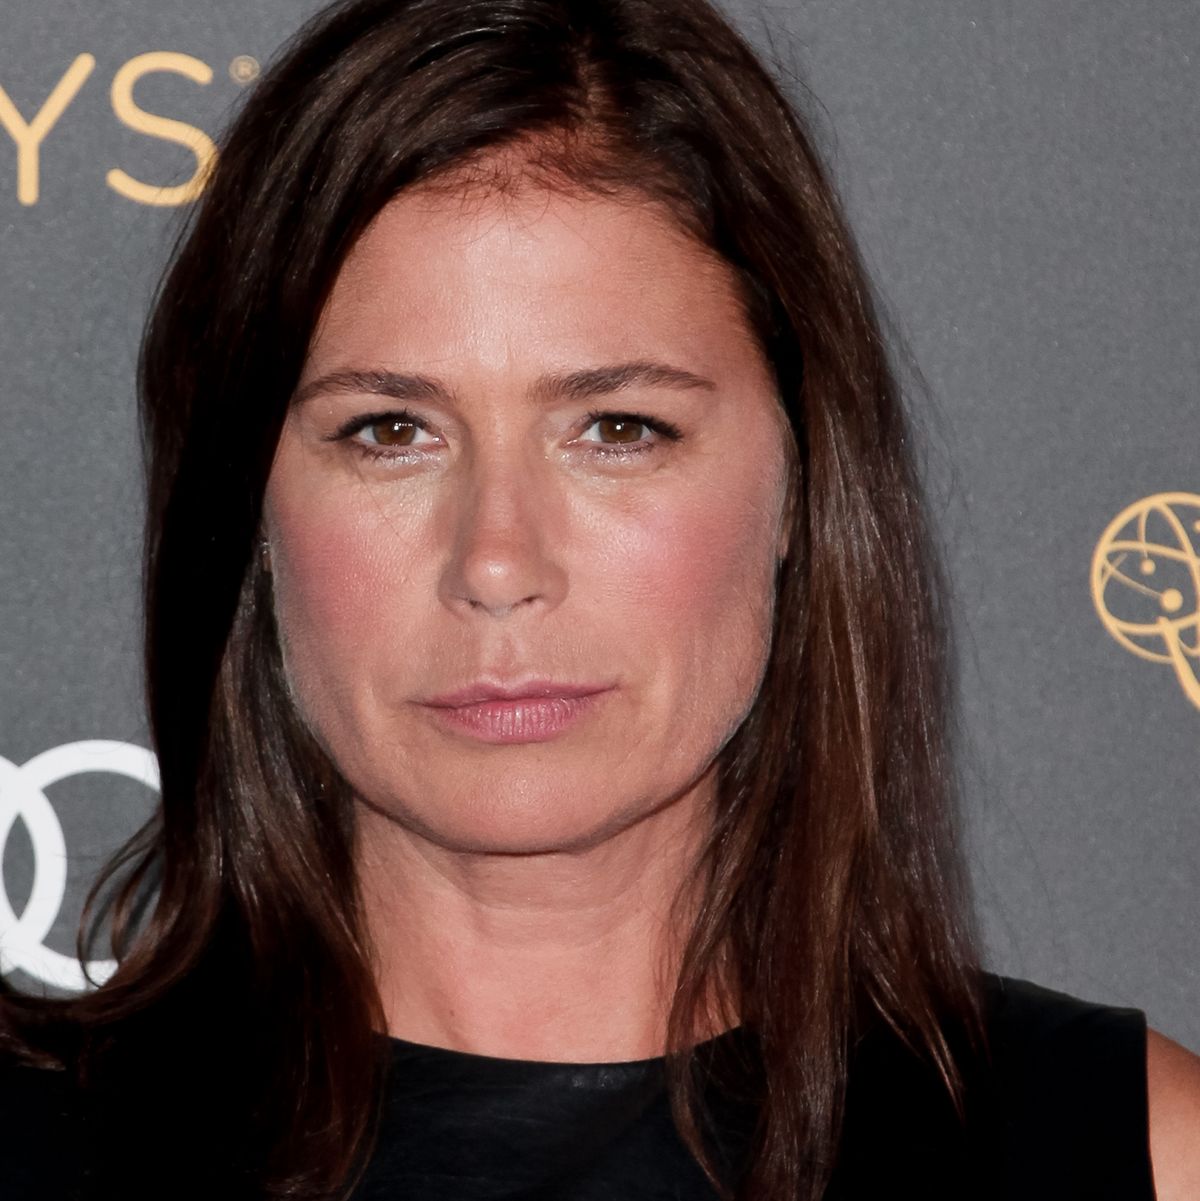 Tierney maura pictures of Maura Tierney